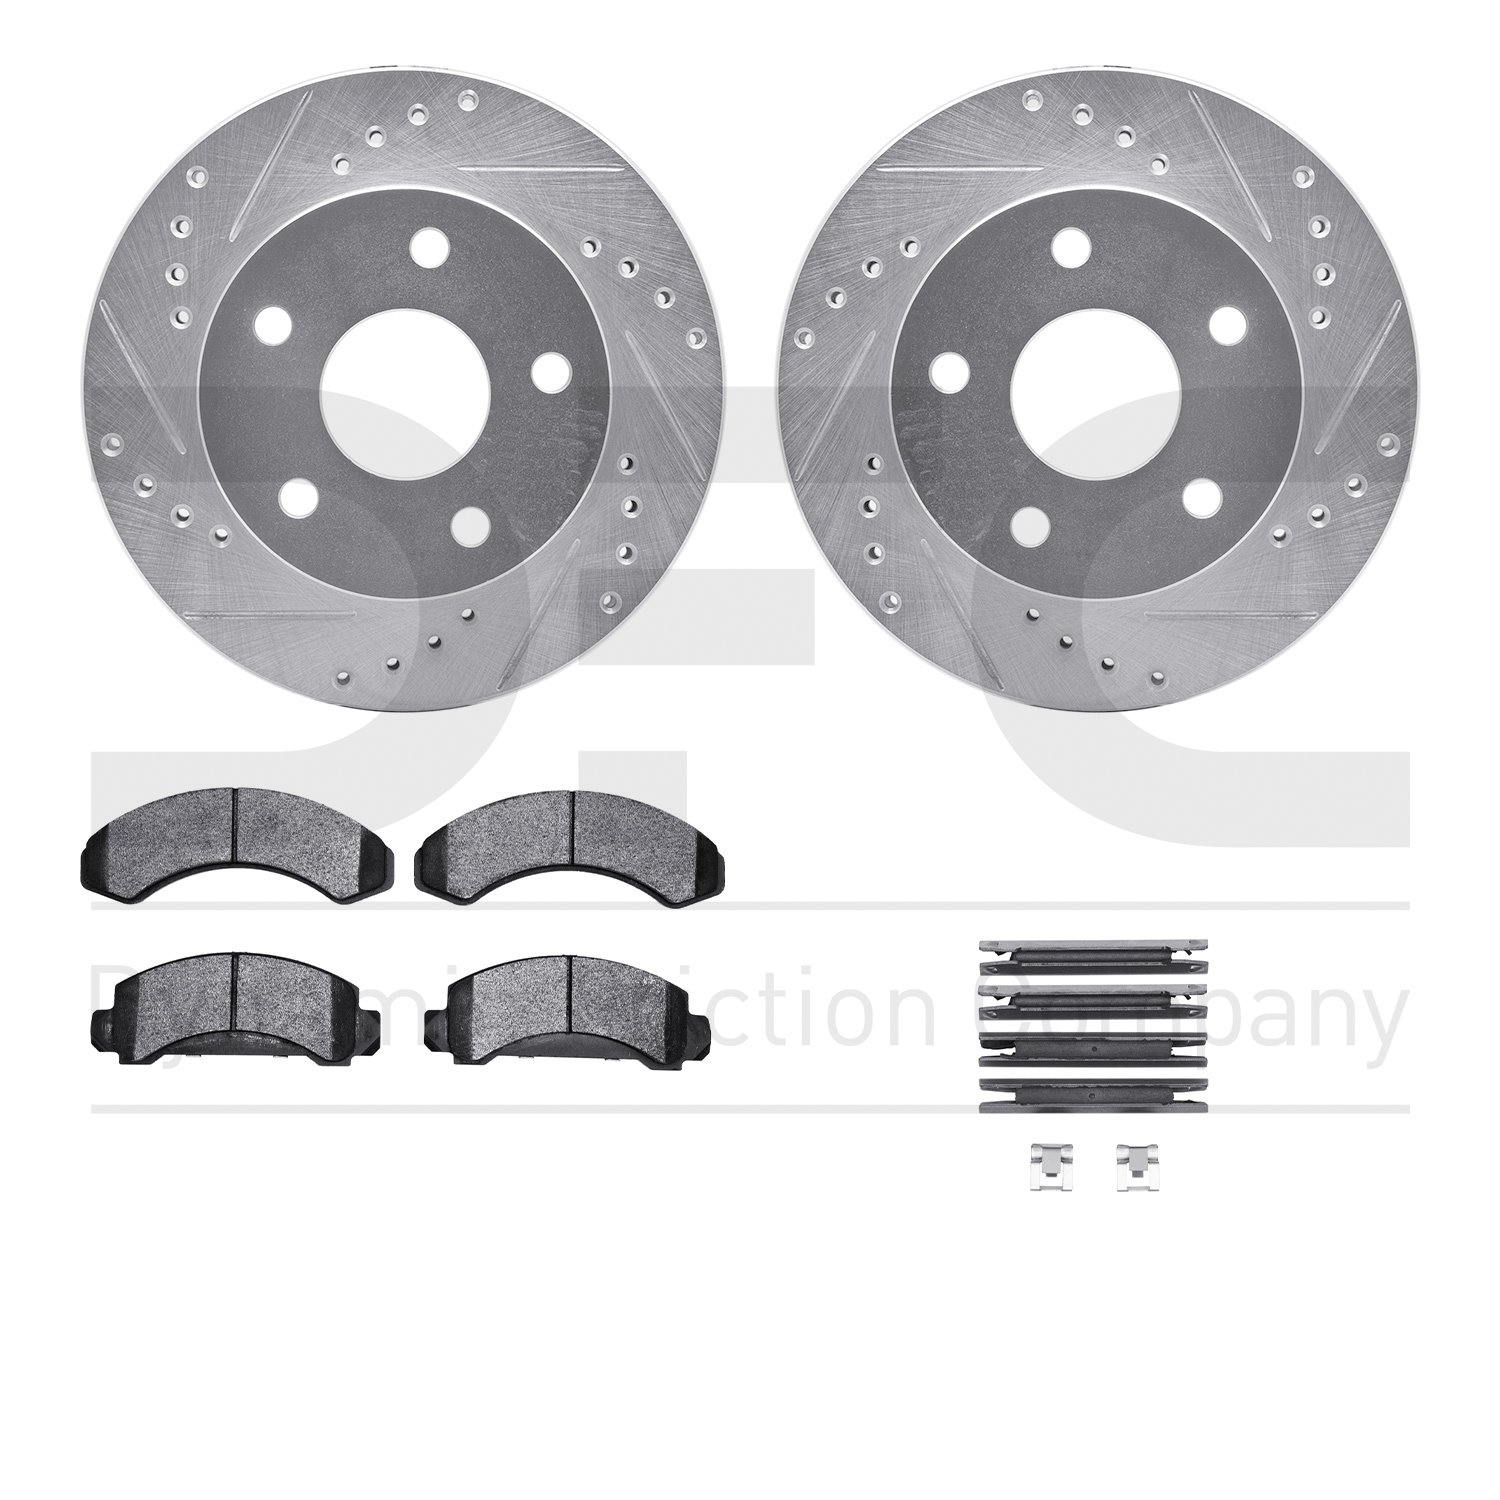 7412-54017 Drilled/Slotted Brake Rotors with Ultimate-Duty Brake Pads Kit & Hardware [Silver], 1990-1997 Ford/Lincoln/Mercury/Ma